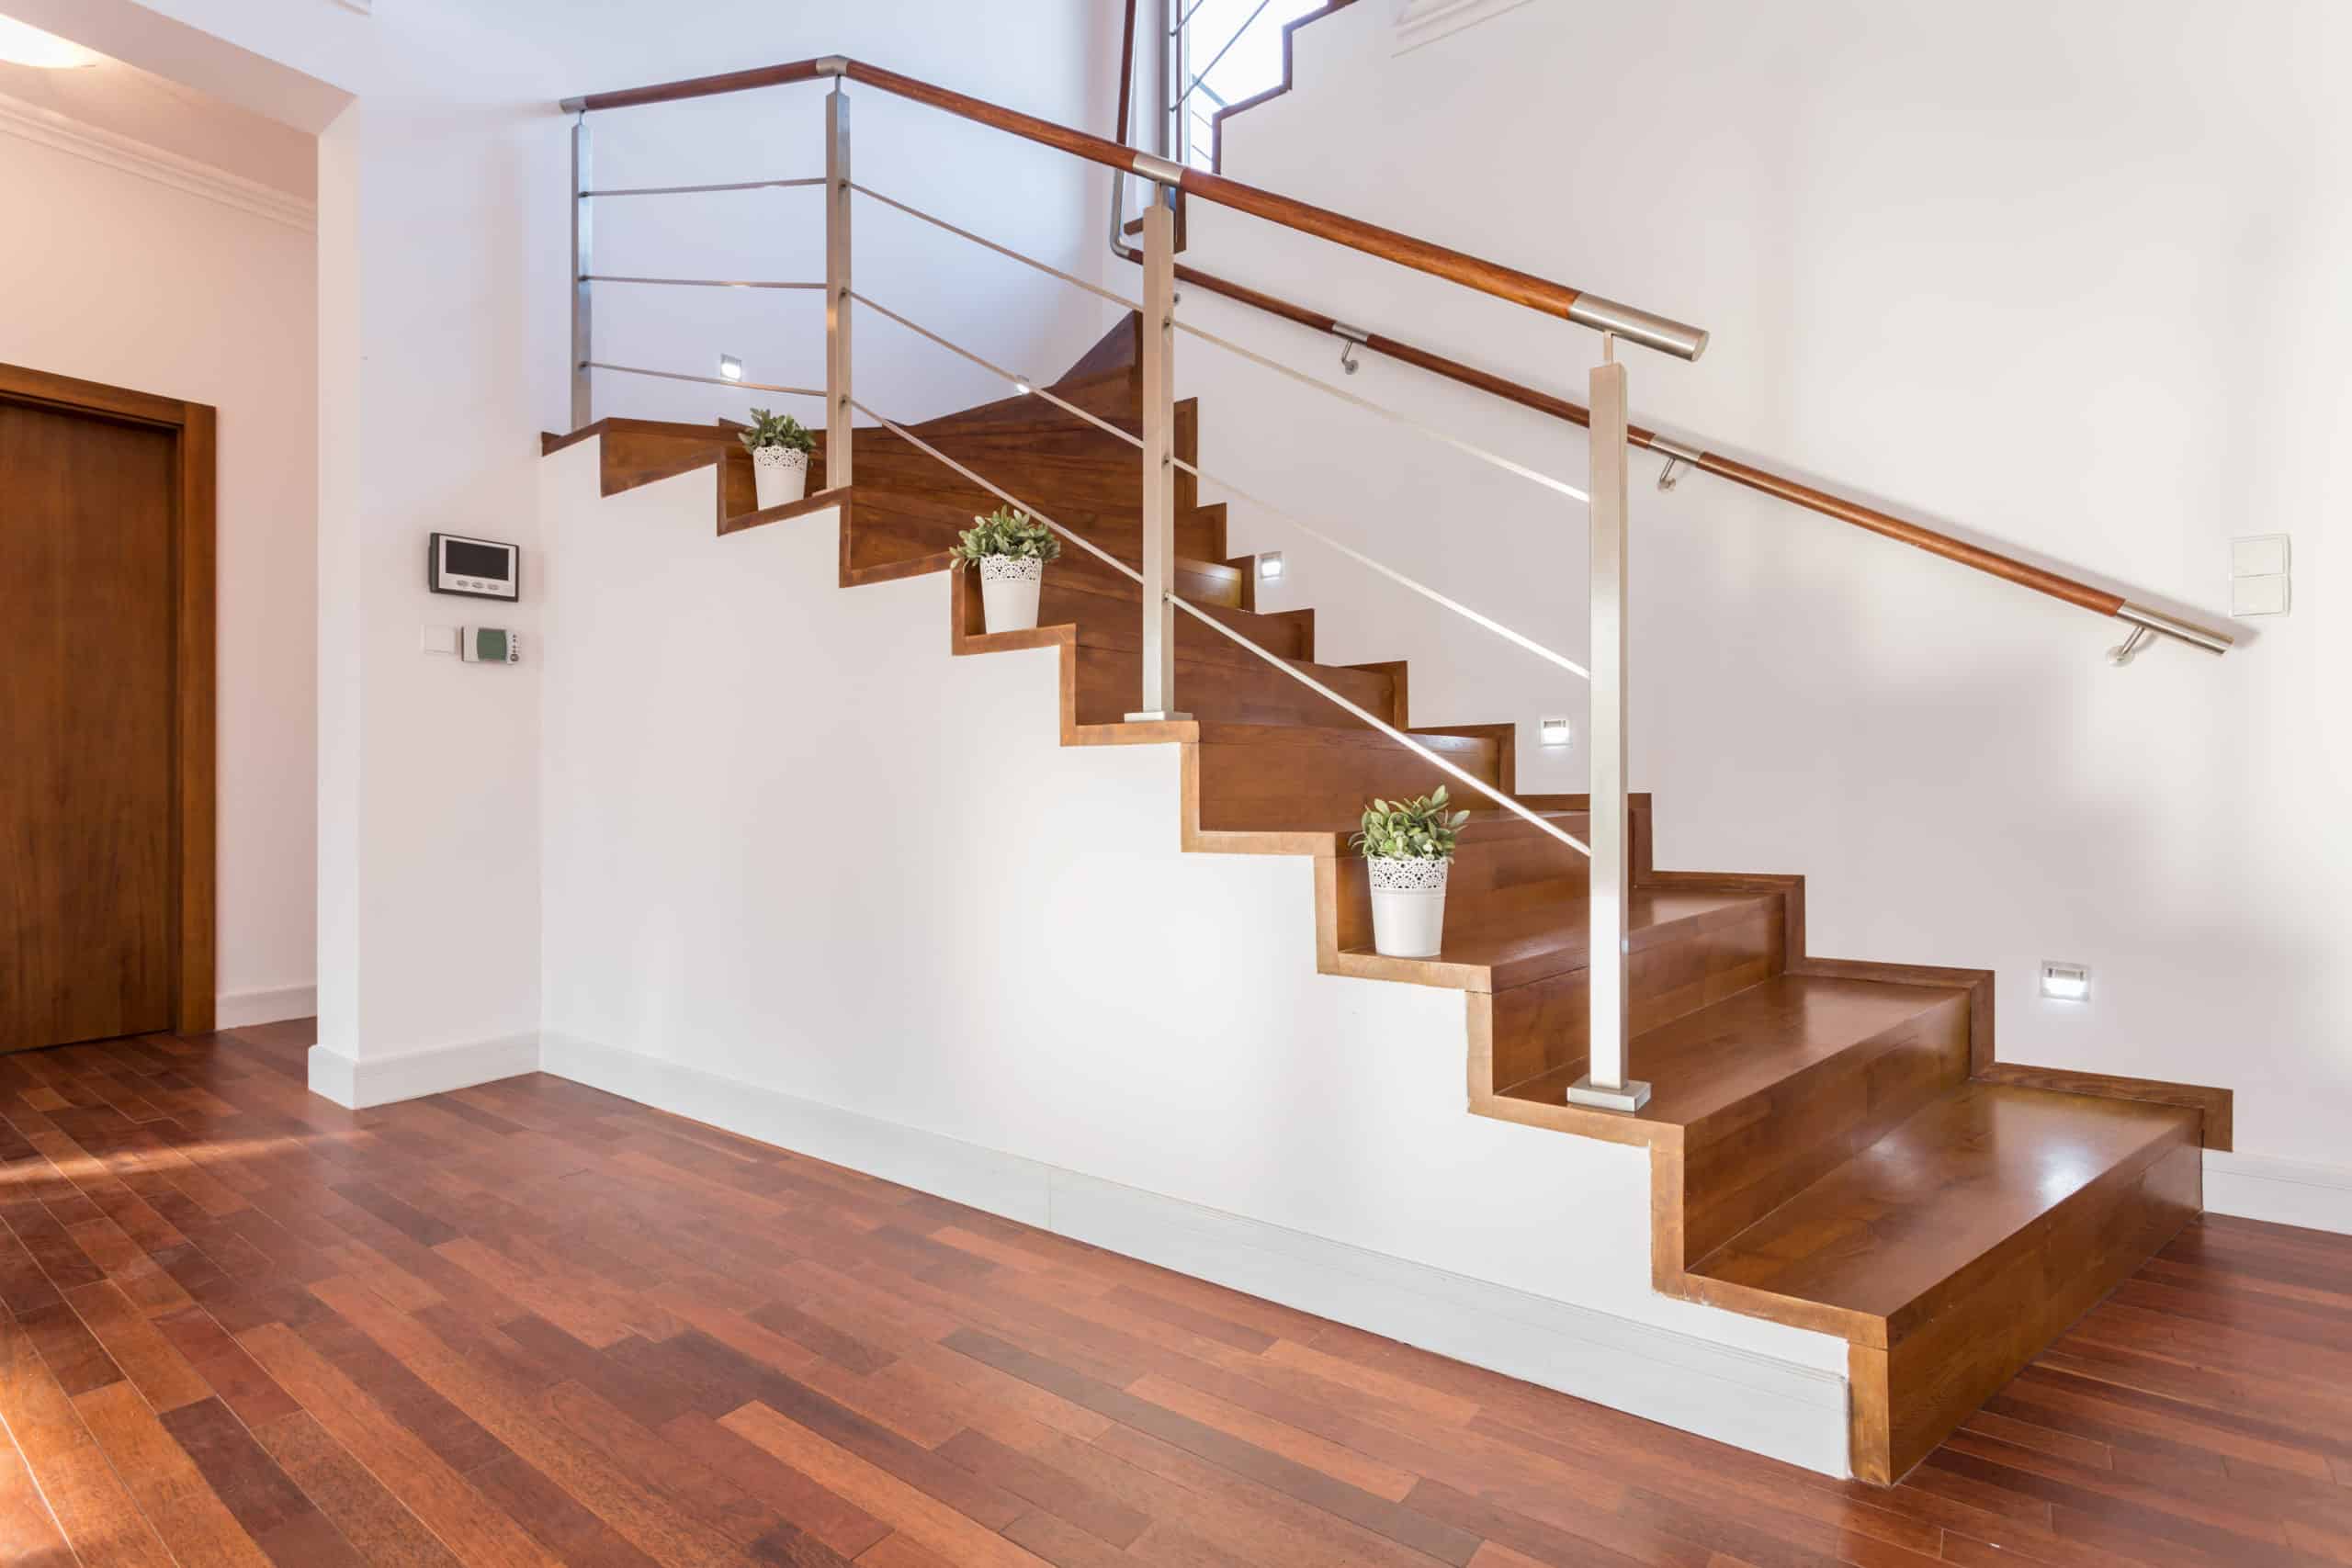 BIMobject-Wood-stairs-idea-for-better-life-01-scaled